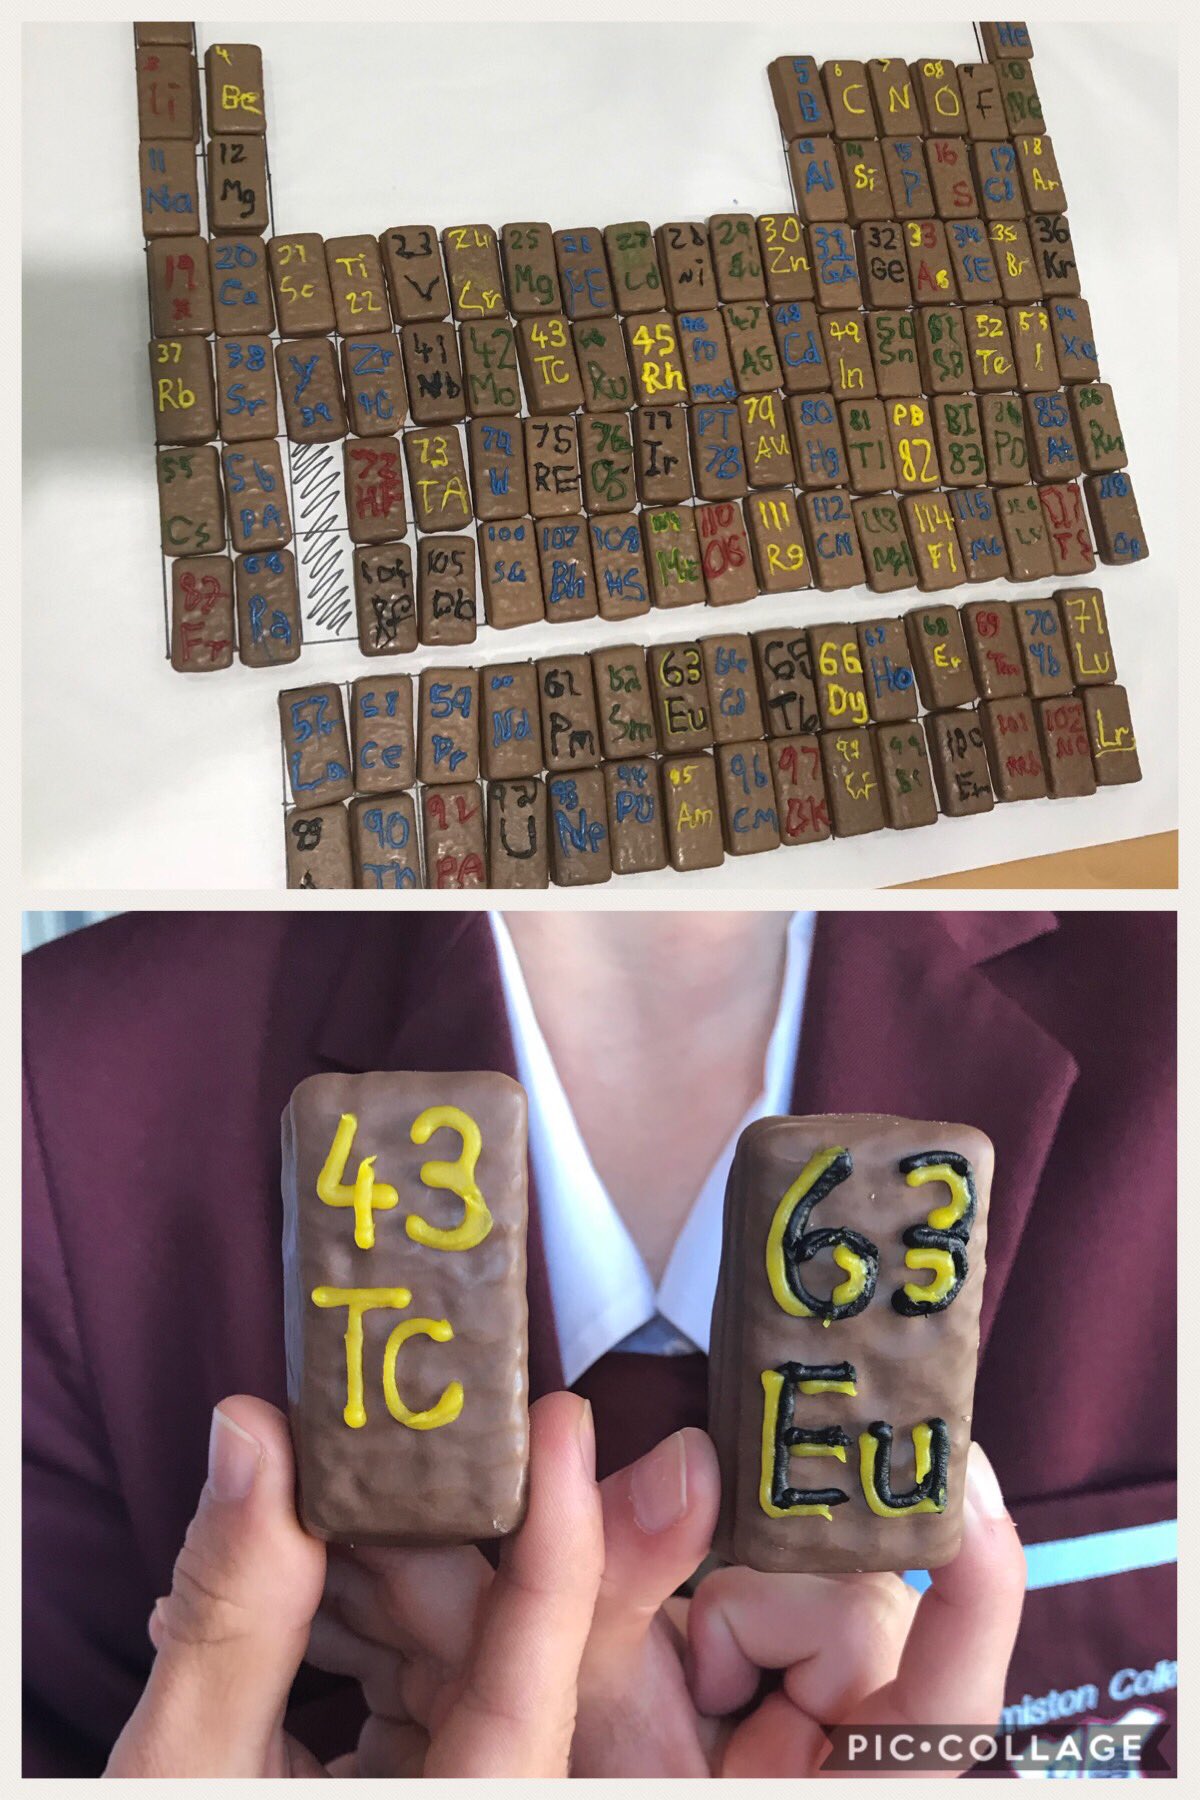 konstant Hysterisk morsom tiger Rowena Taylor on Twitter: "Great way to finish off #ScienceWeek with a full  size Tim Tam Periodic Table! #learningatOC #UQScienceAmbassadors  https://t.co/bFSTFCgxV7" / Twitter